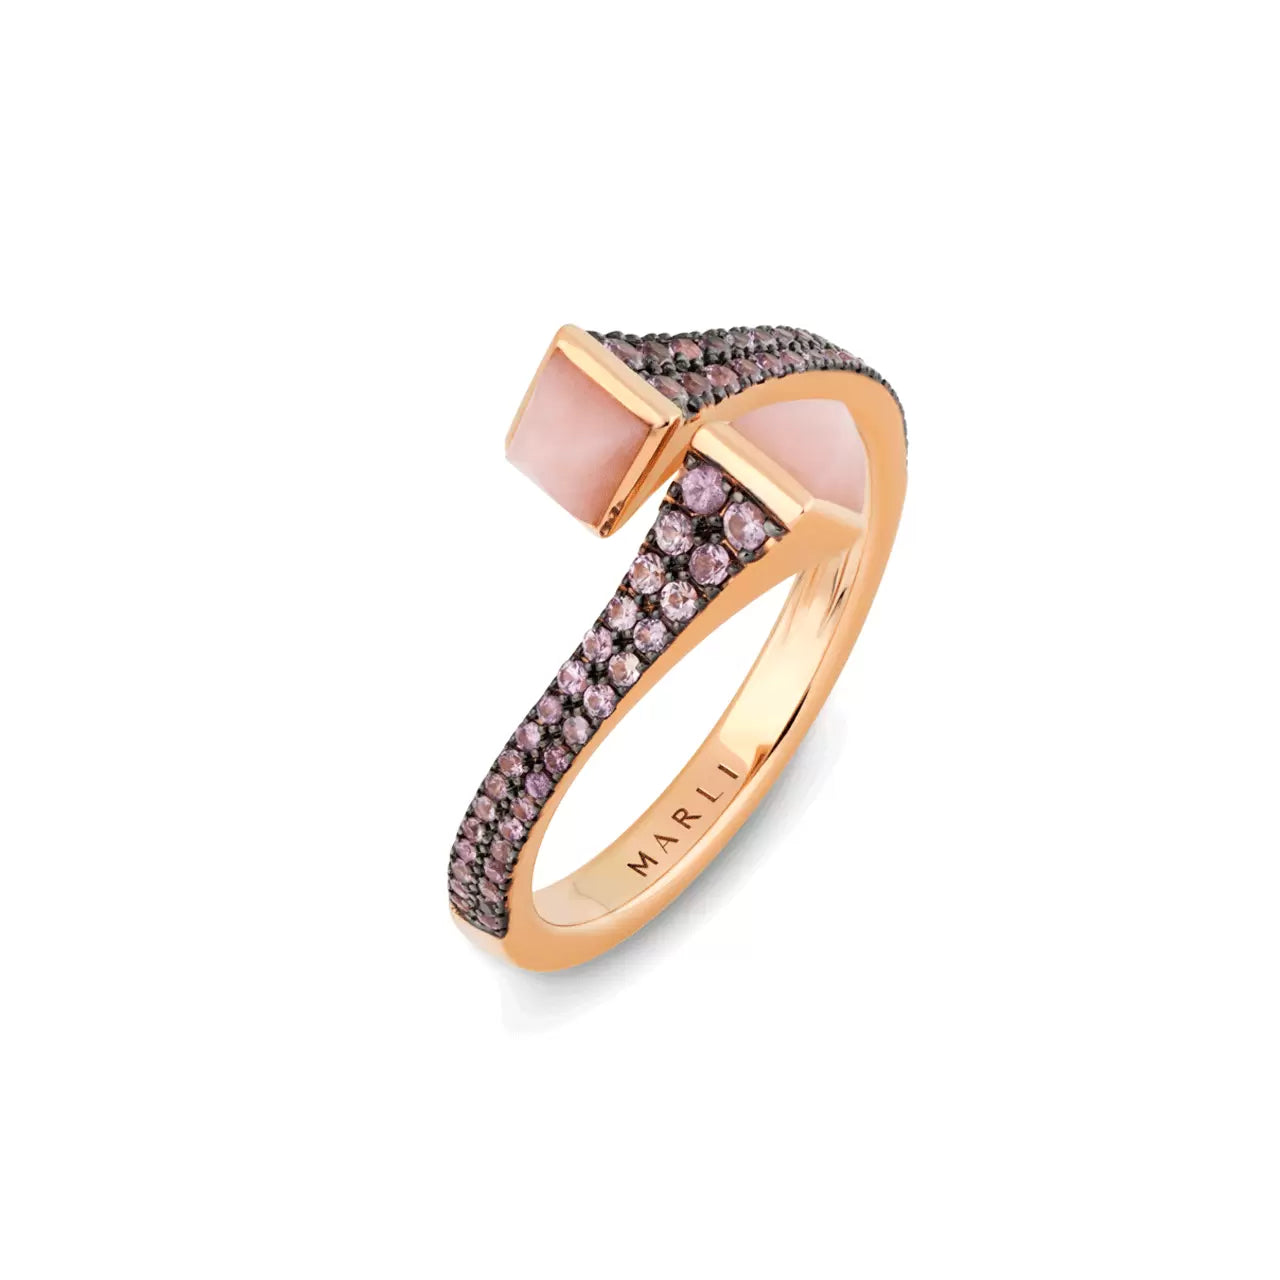 Marli Cleo 18k Gold Sapphire and Opal Ring